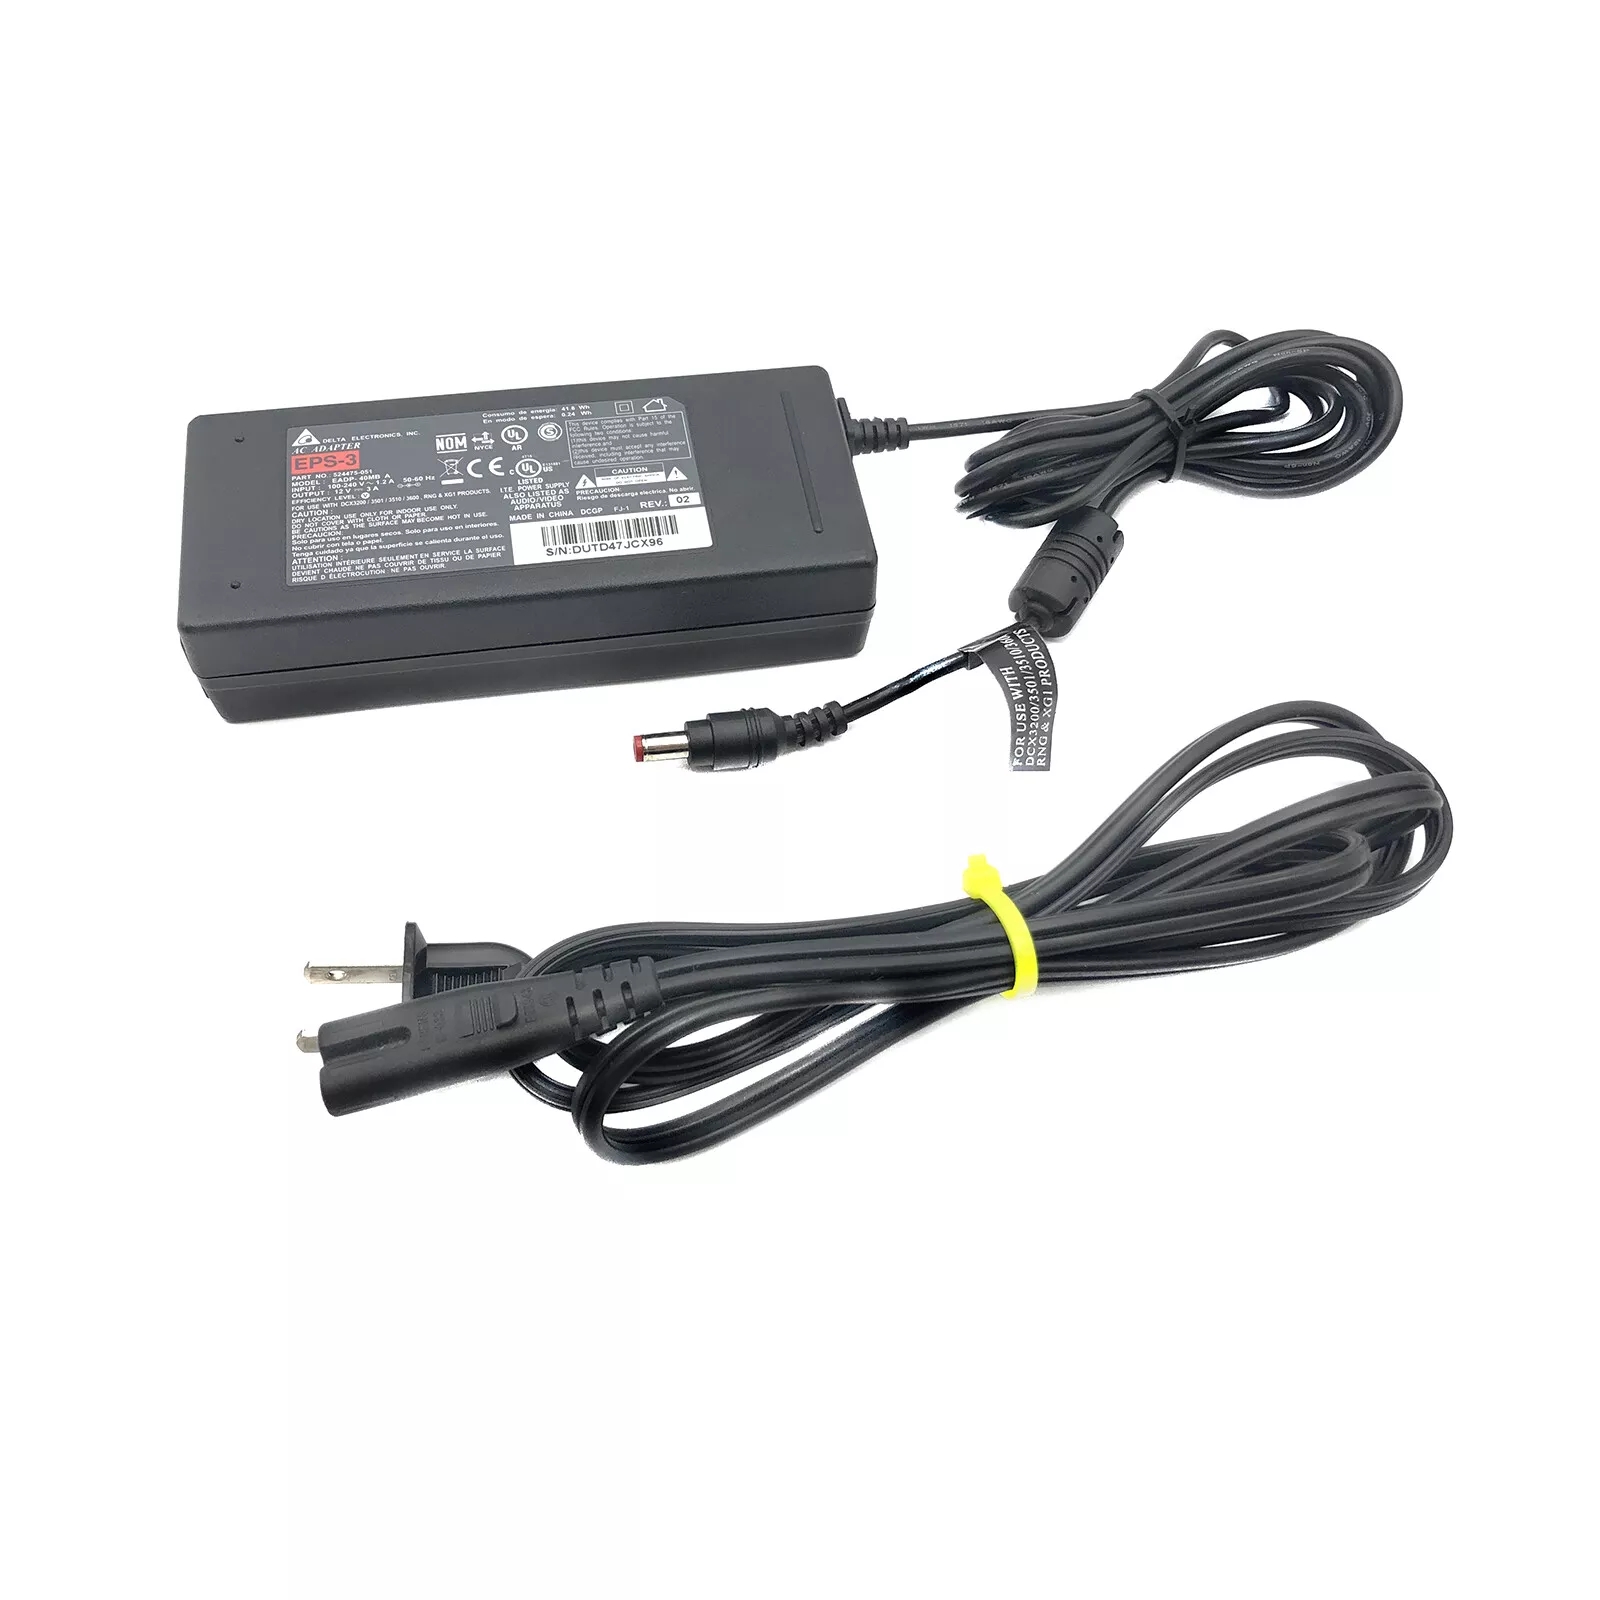 *Brand NEW*Genuine Delta 524475-051 EADP-40MB A 12V 3A AC Adapter Power Supply